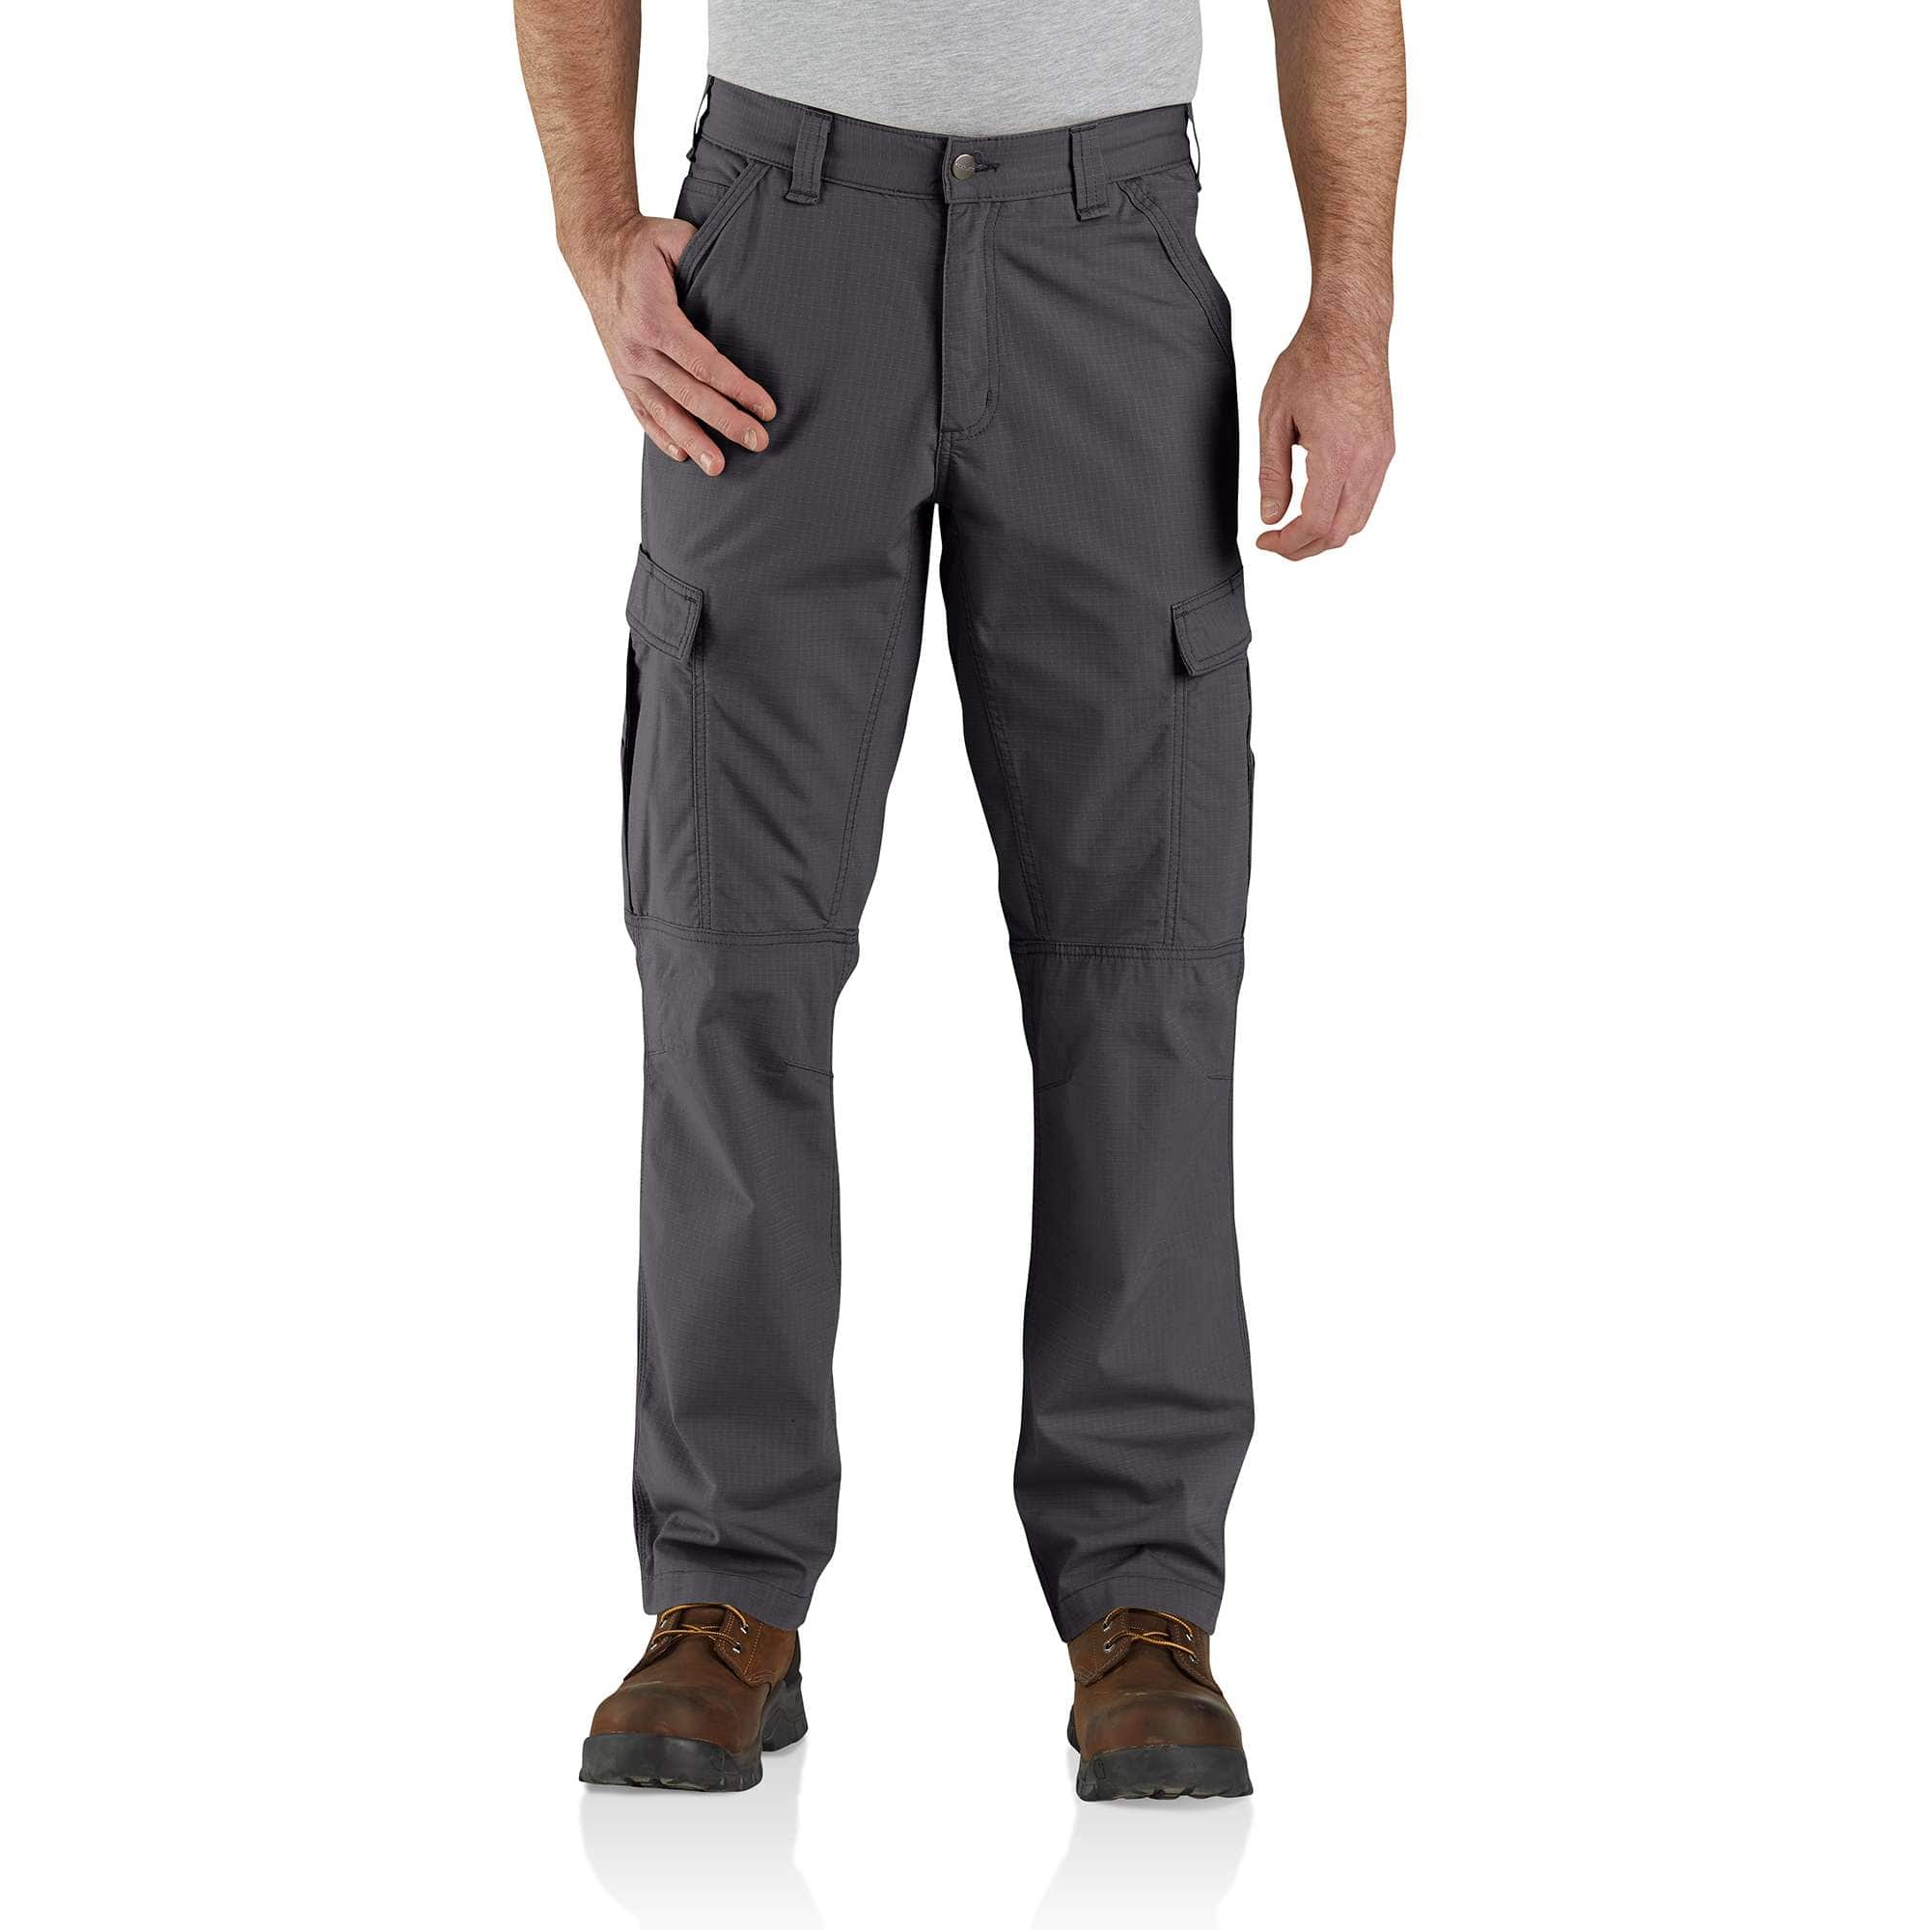 Carhartt 30x34 Moss Ripstop Cargo Work Pants, Relaxed Fit - Henery